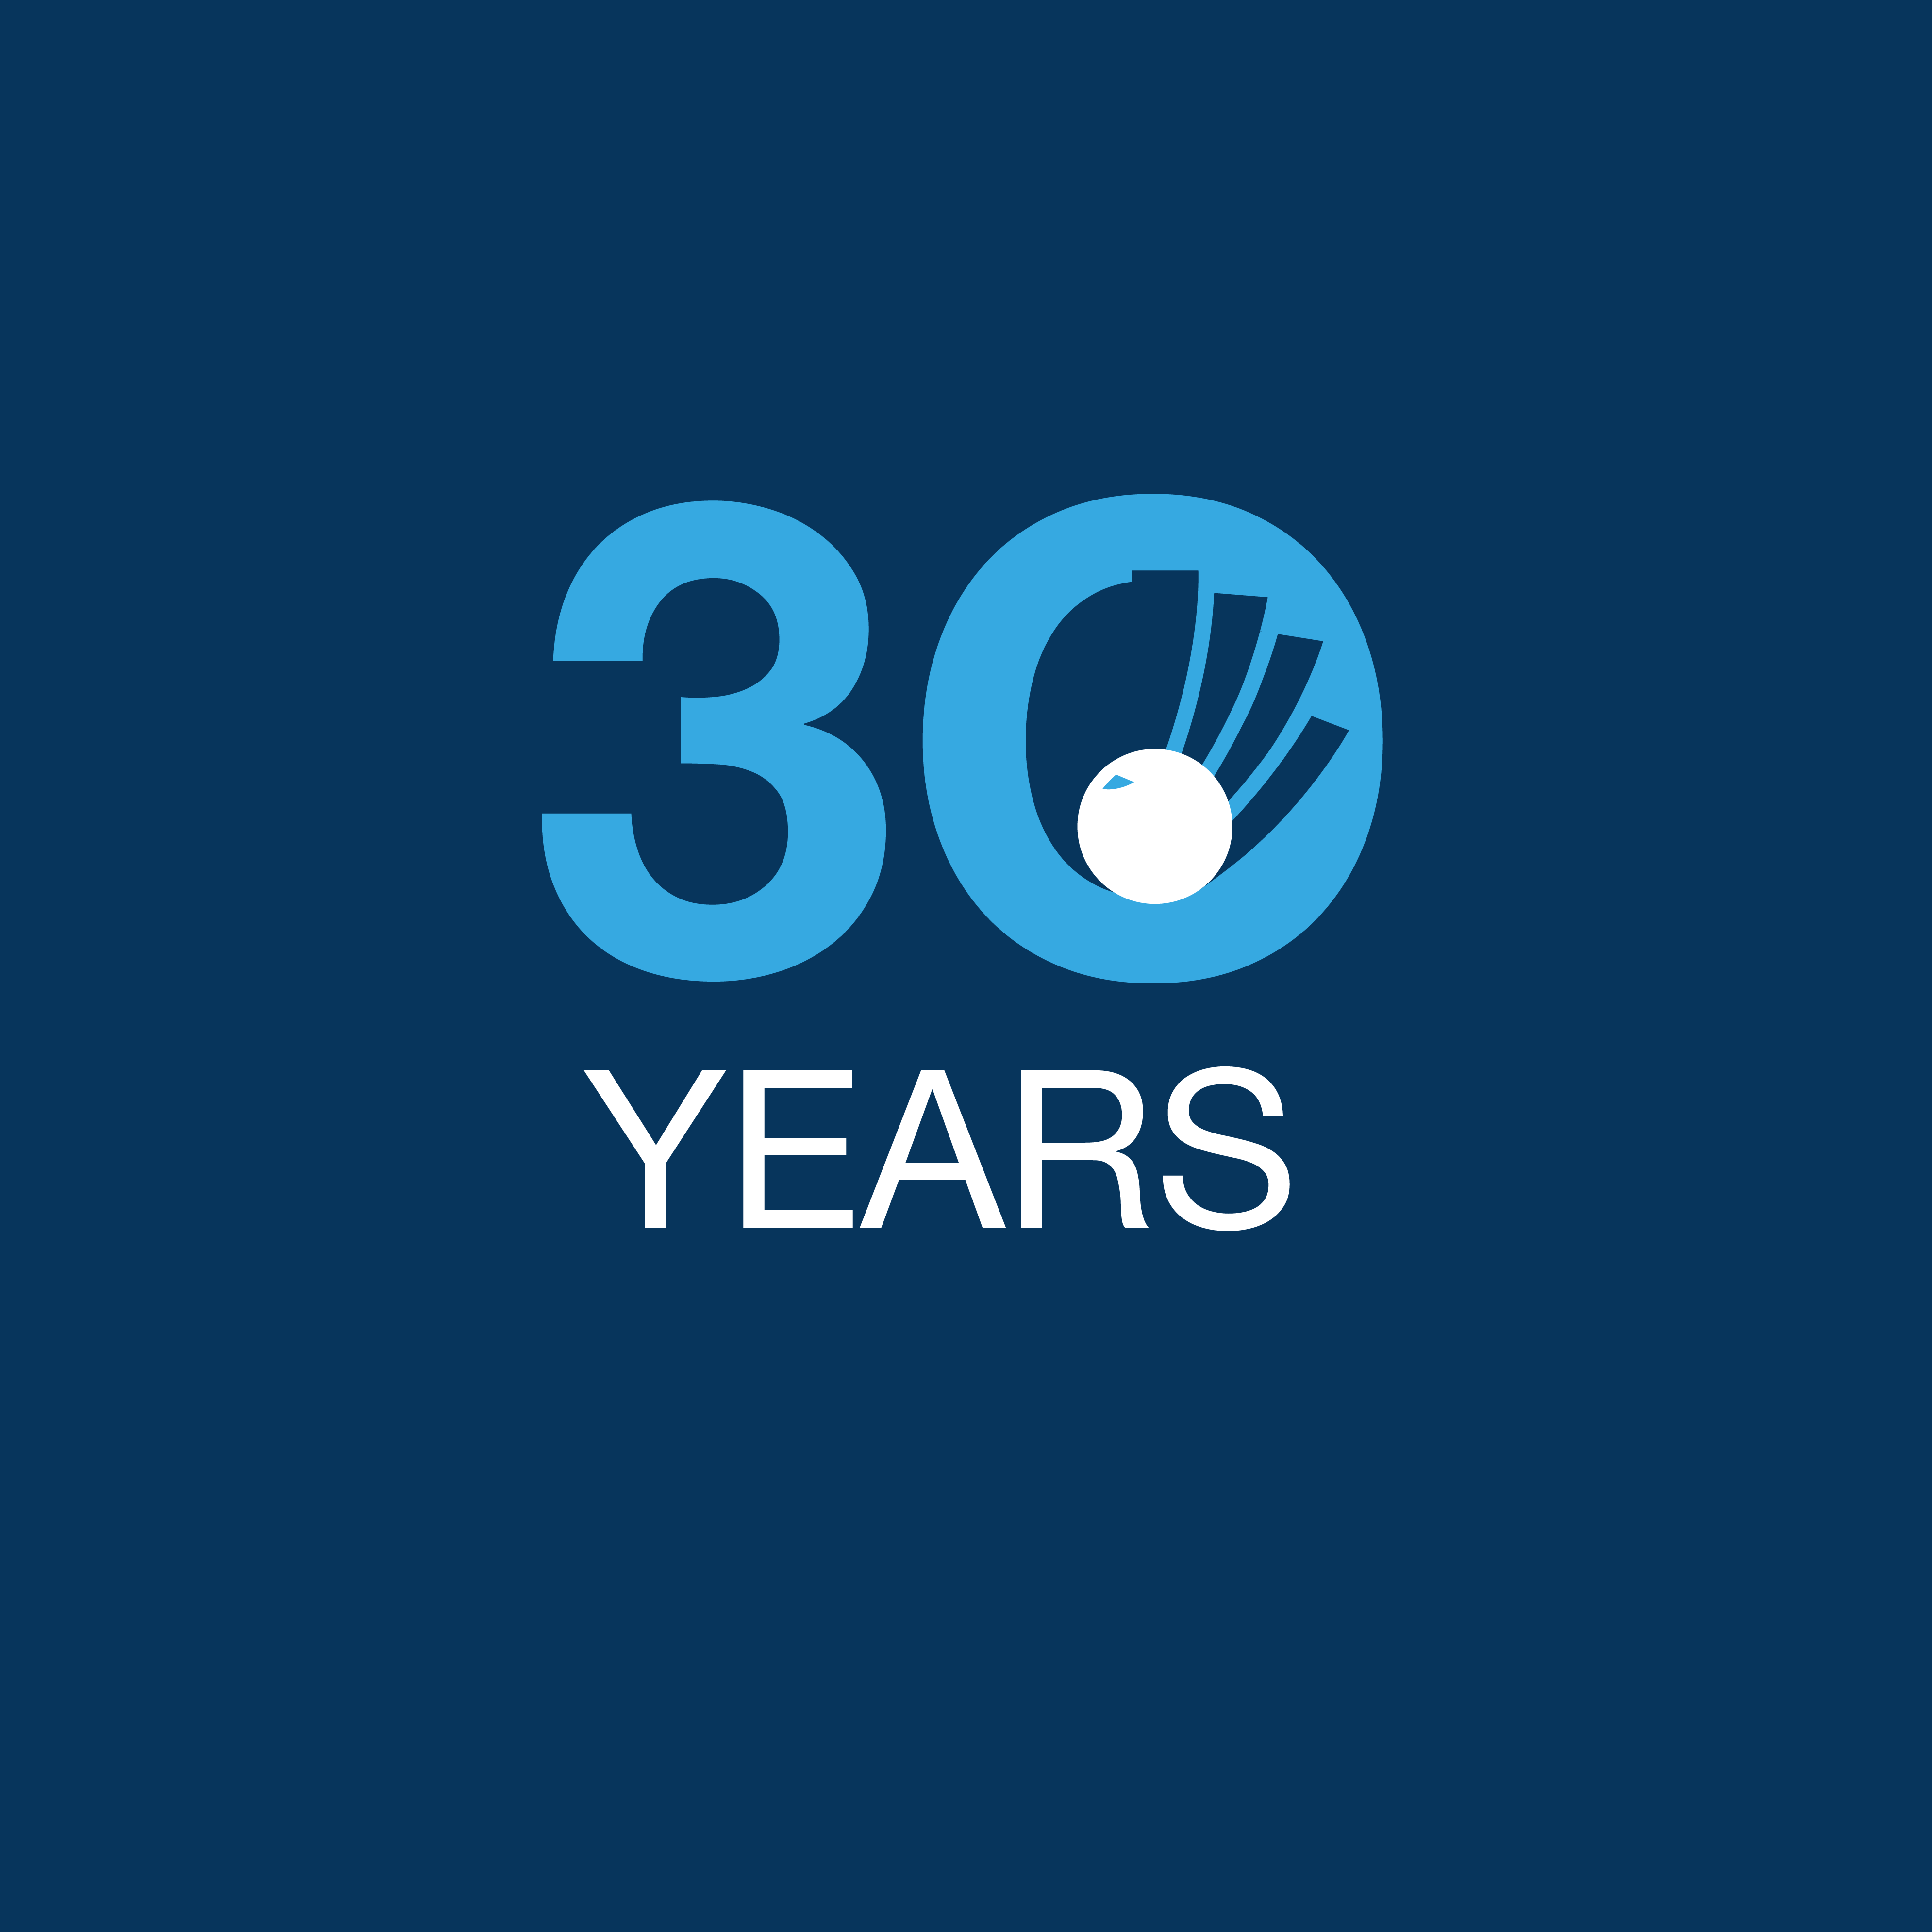 It’s Our 30th Anniversary!